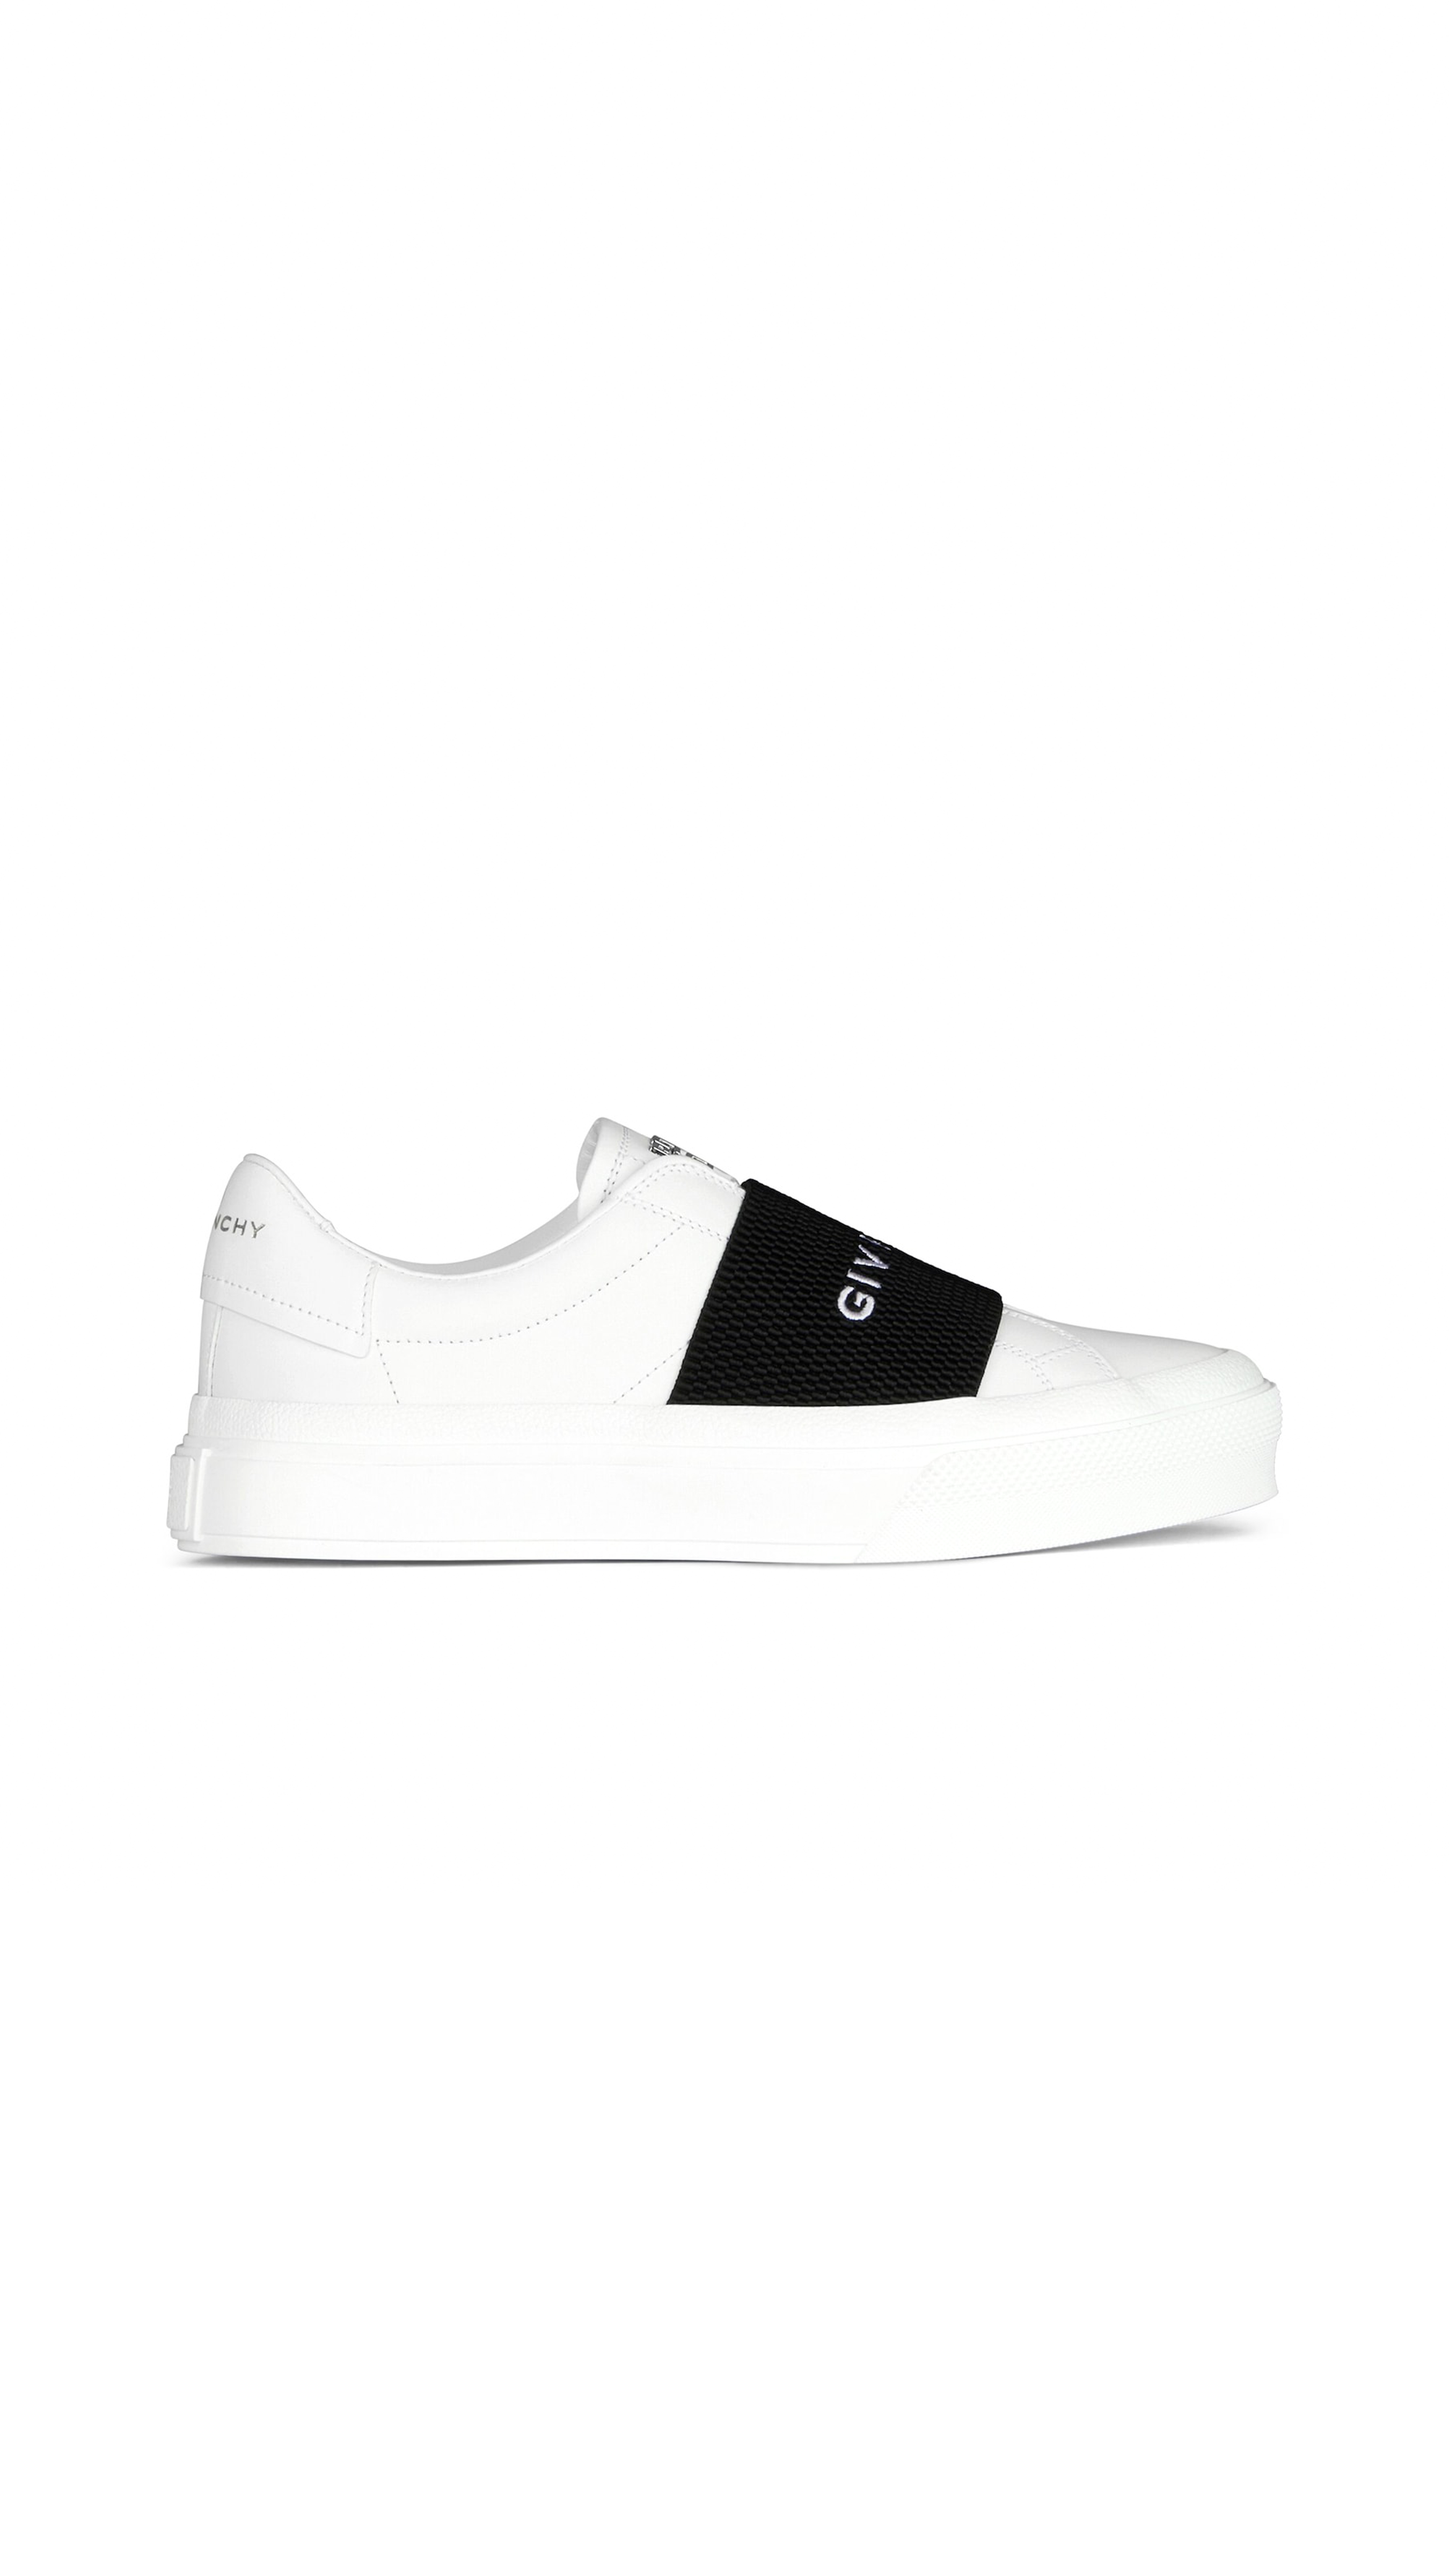 Sneaker In Leather With Webbing - White/Black